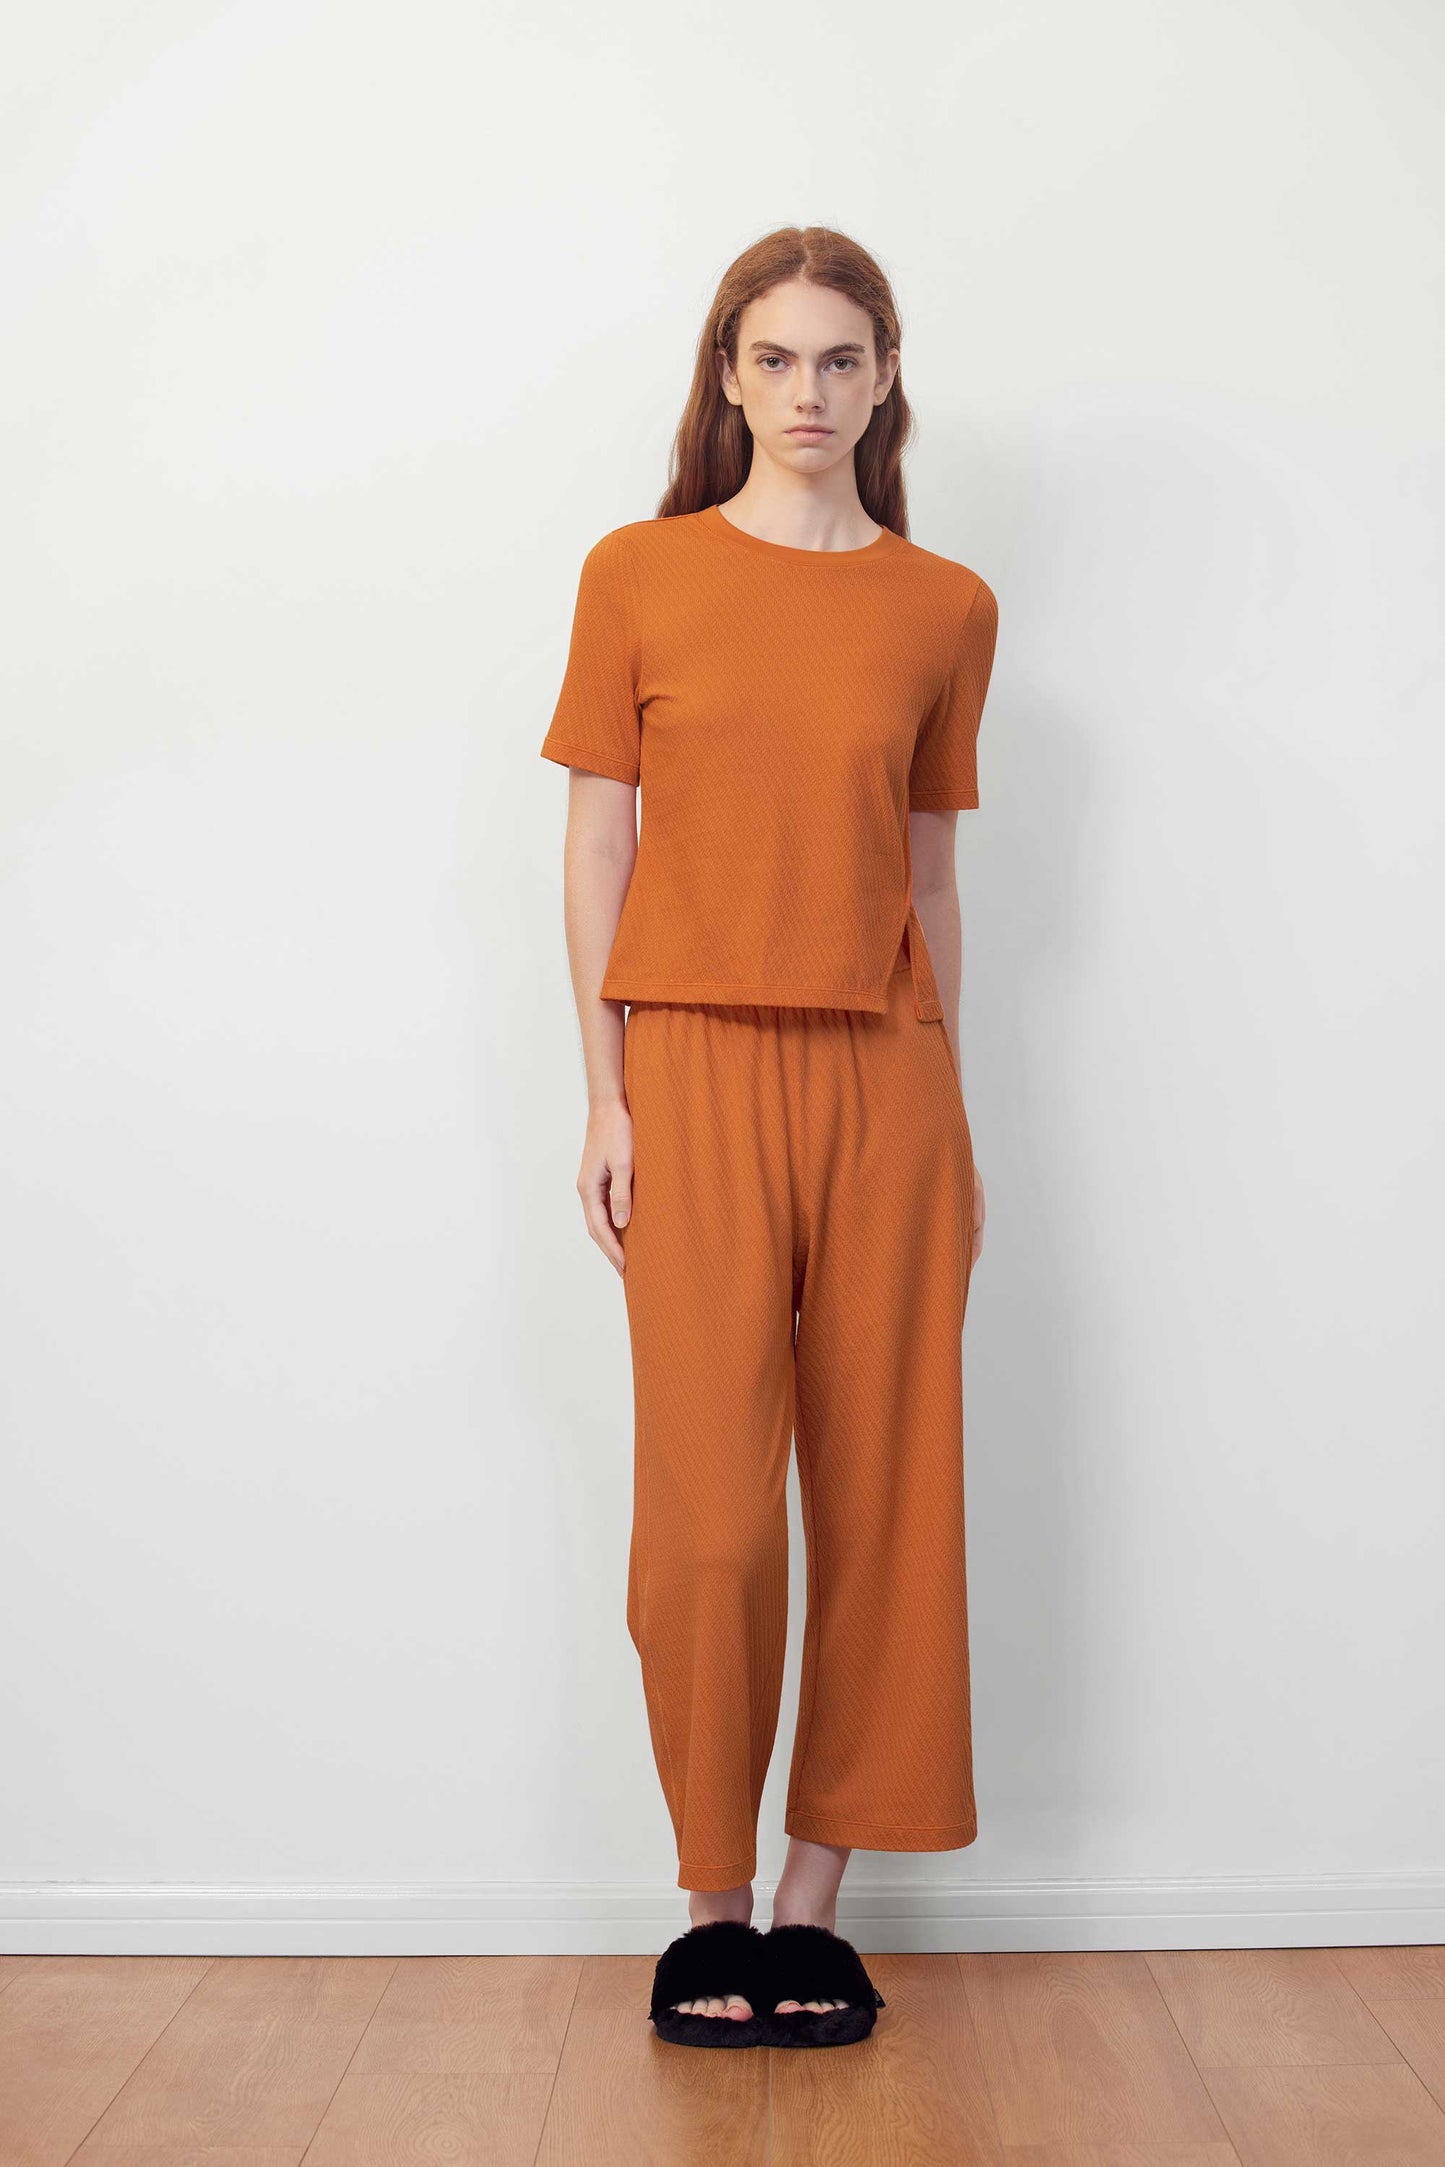 woman in orange T-shirt and pants